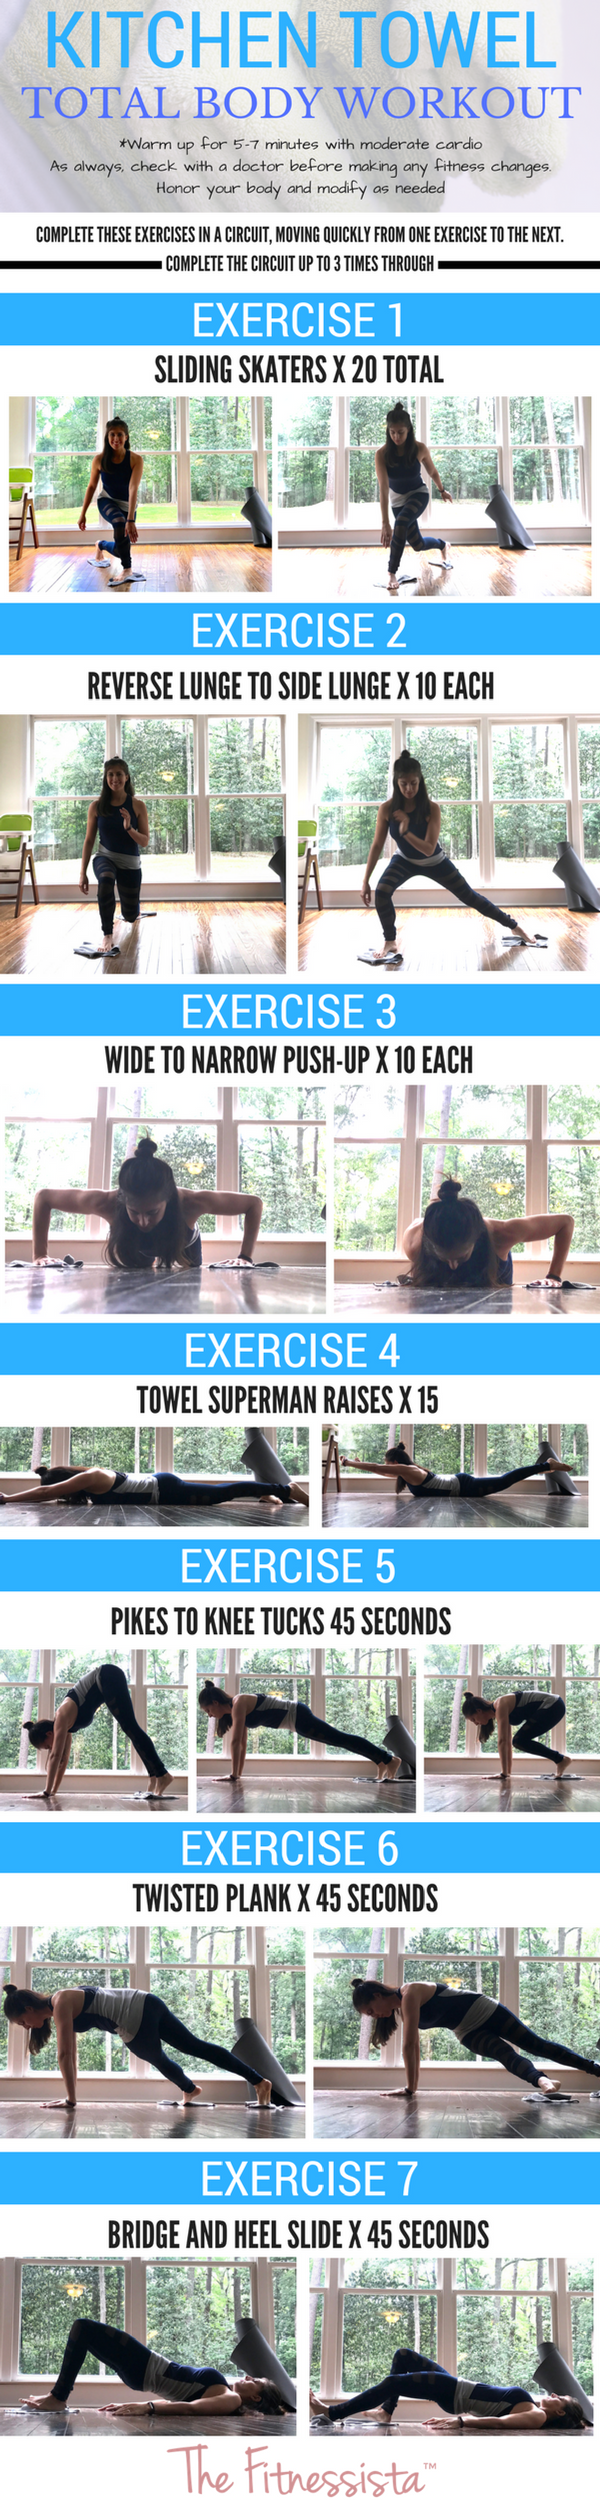 Kitchen towel workout! A perfect rainy day workout, or quiet indoor workout to work your entire body. fitnessista.com